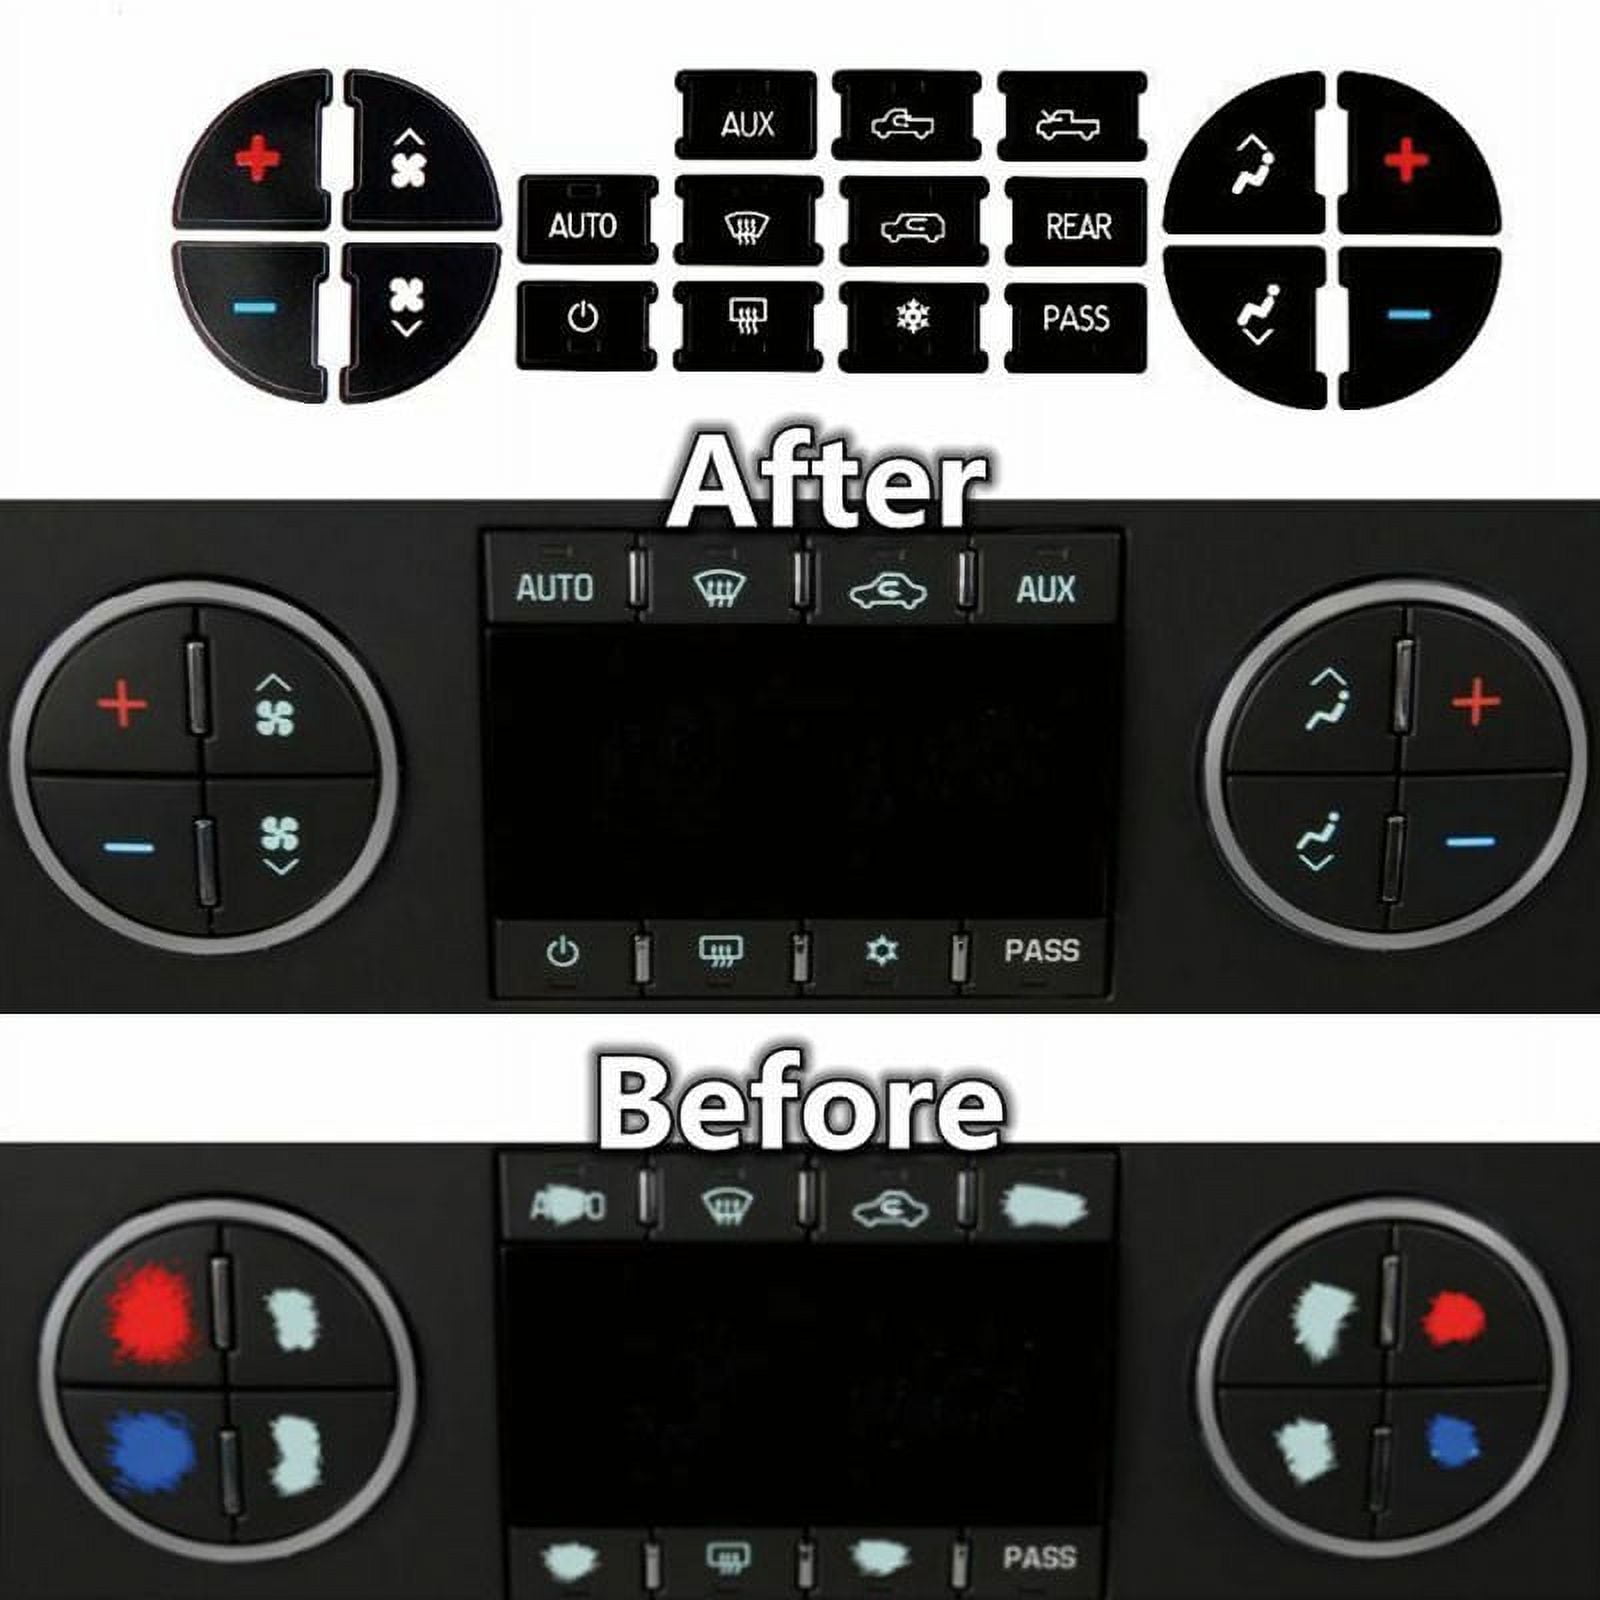 AC Dash Button Repair Kit Sticker for Chevy Best for Fixing Ruined Faded AC  Control Buttons Decal Replacement Fits Select 0714 GM Vehicles & Radio